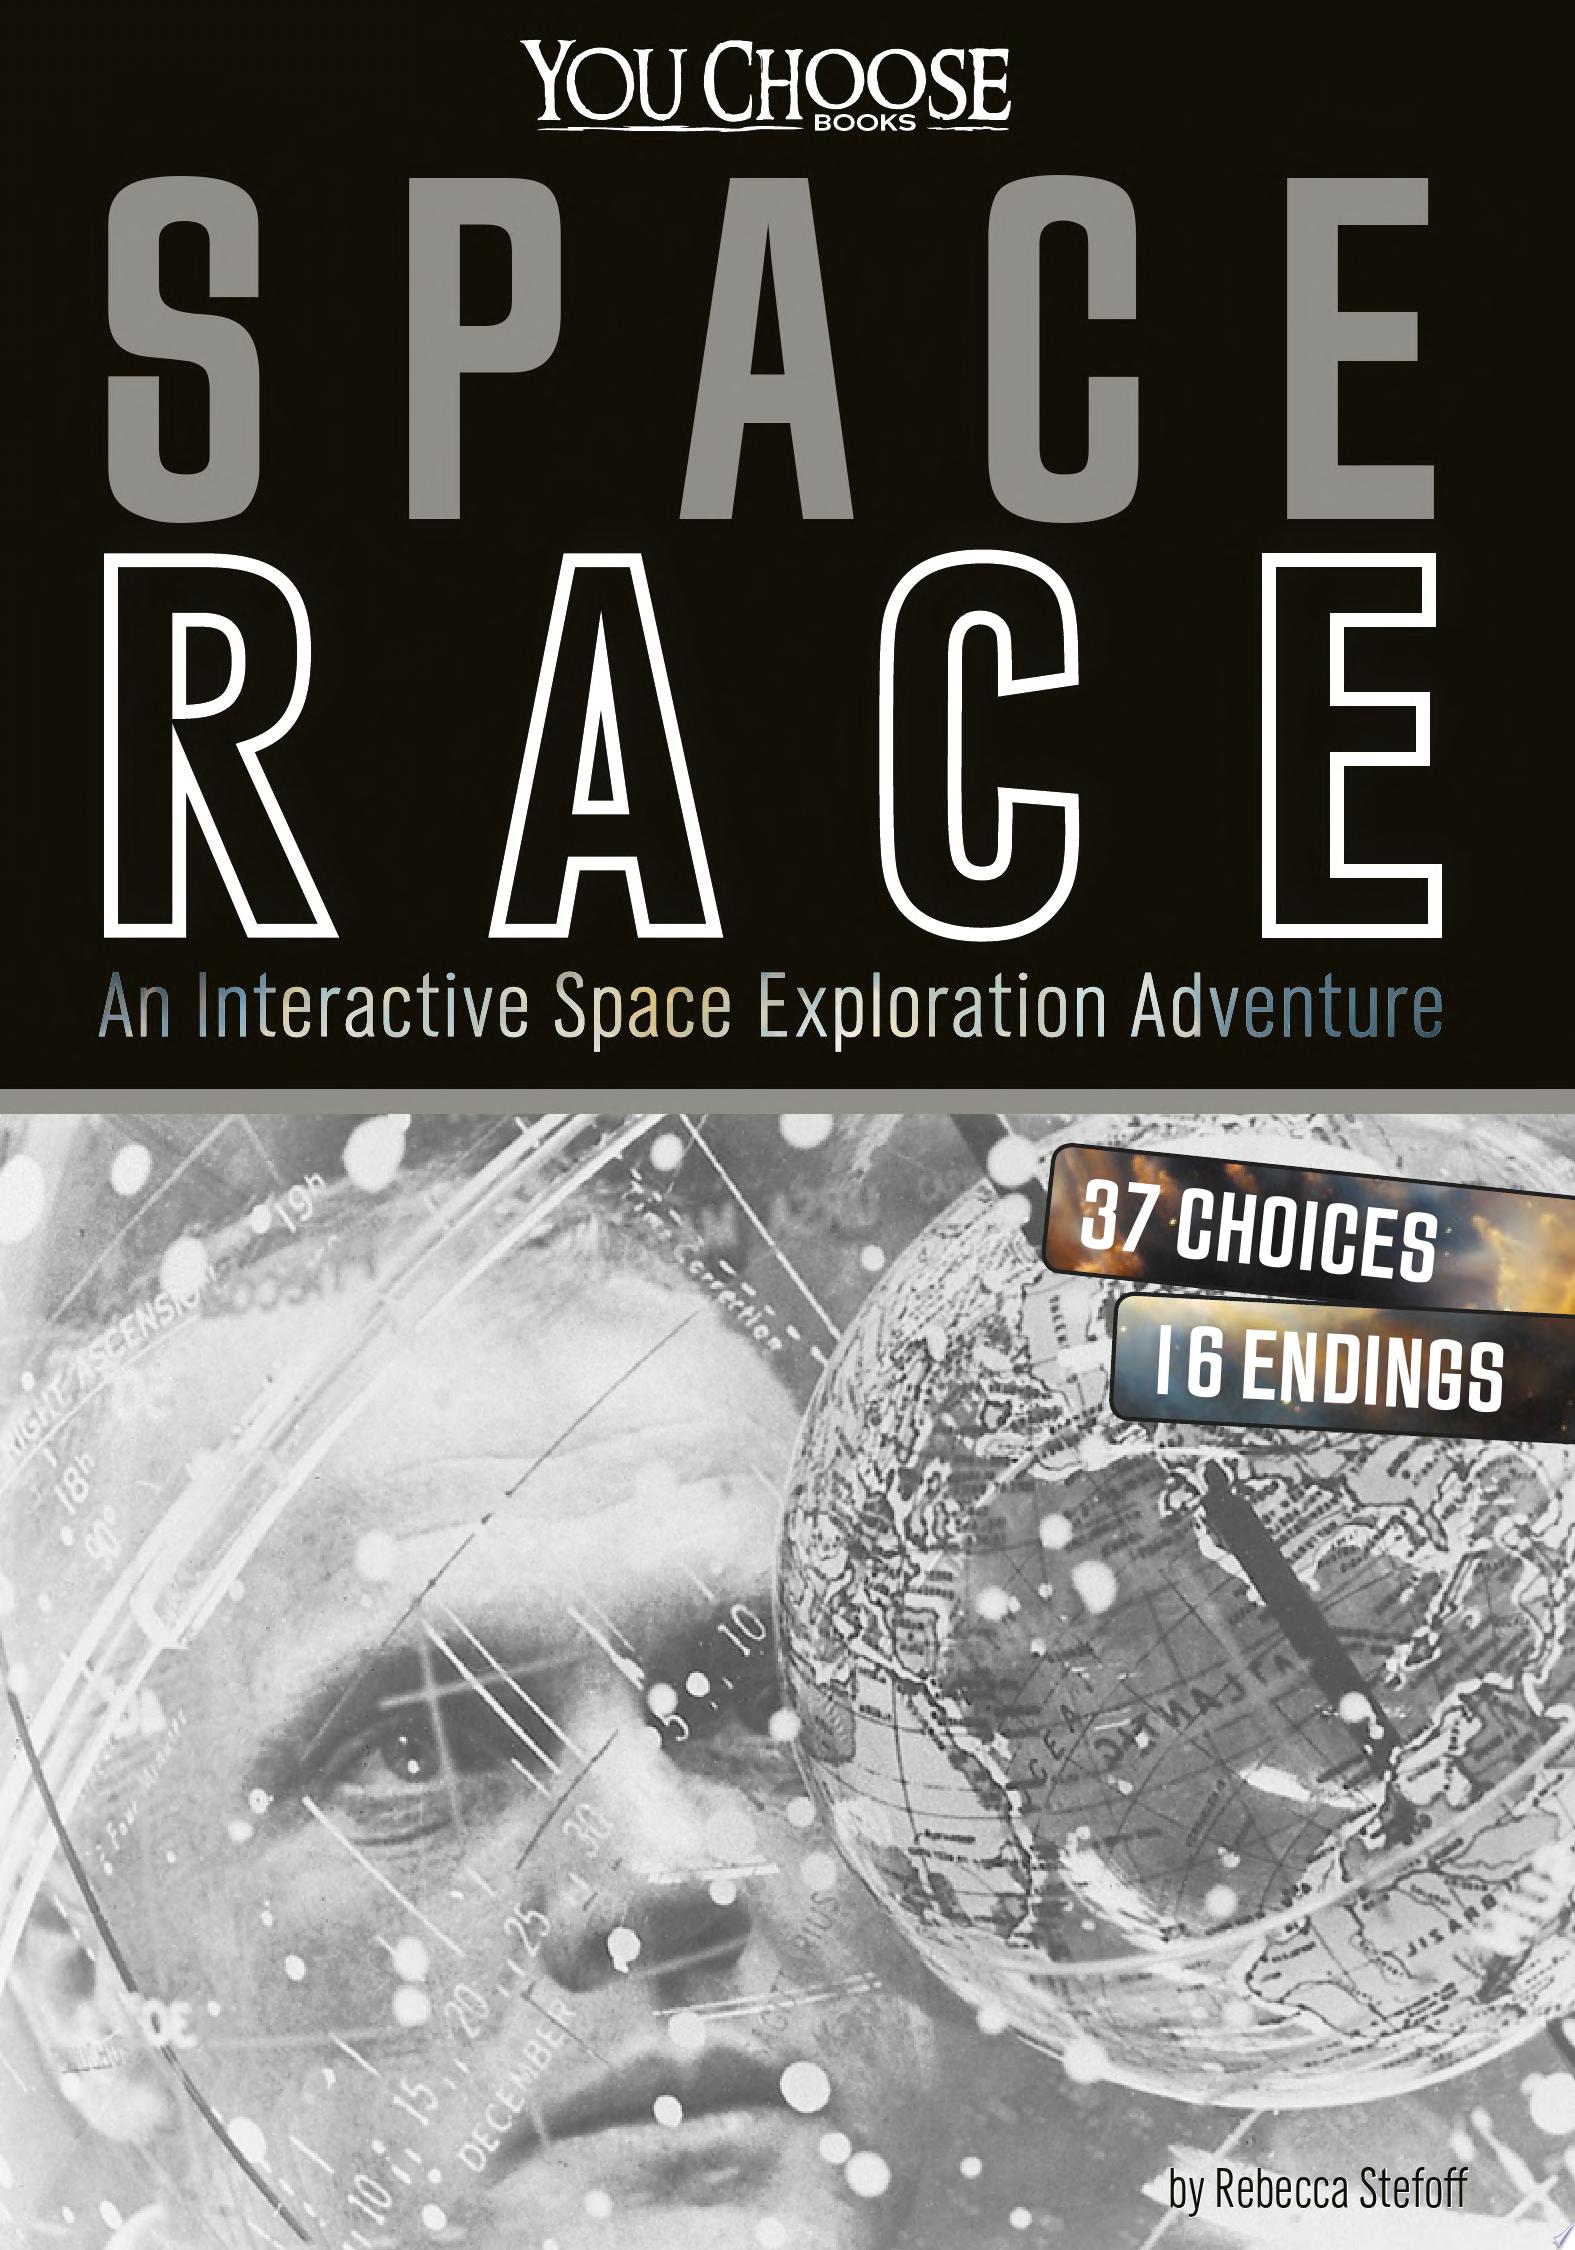 Image for "Space Race"